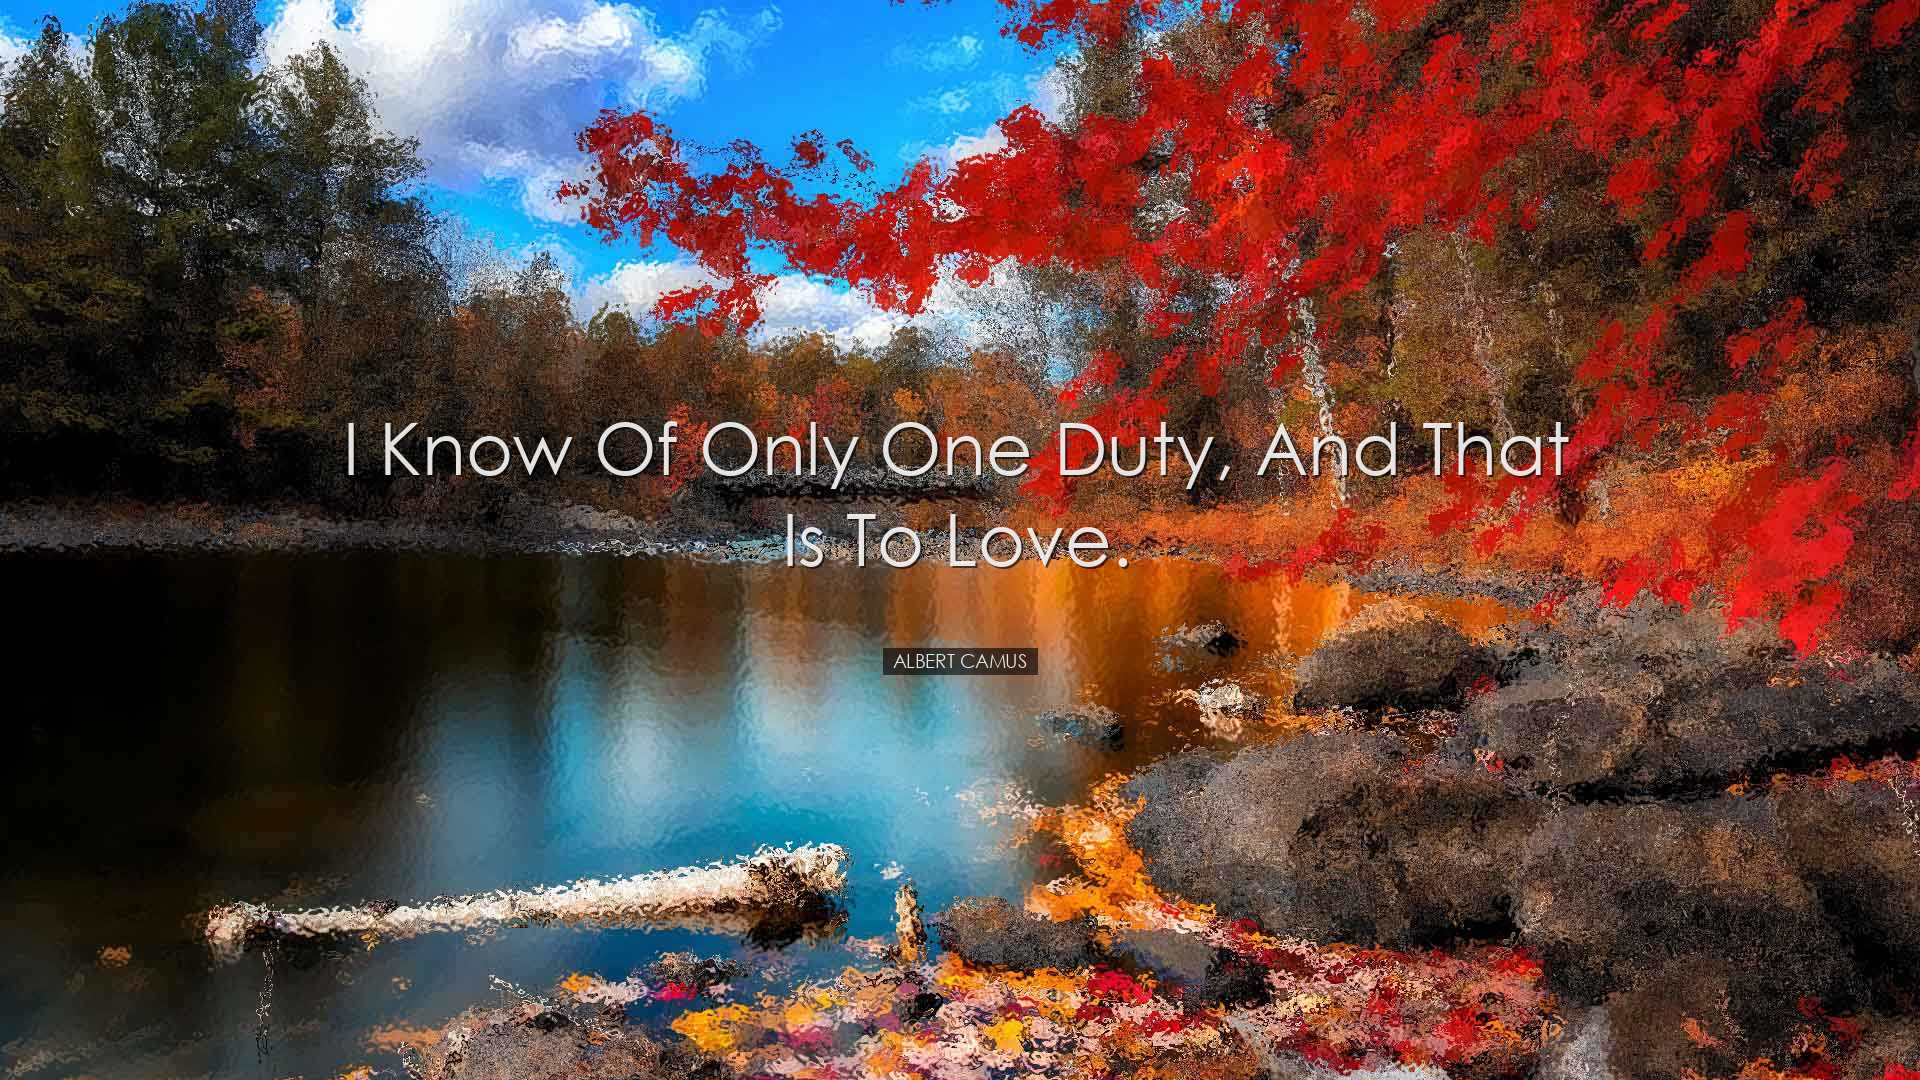 I know of only one duty, and that is to love. - Albert Camus